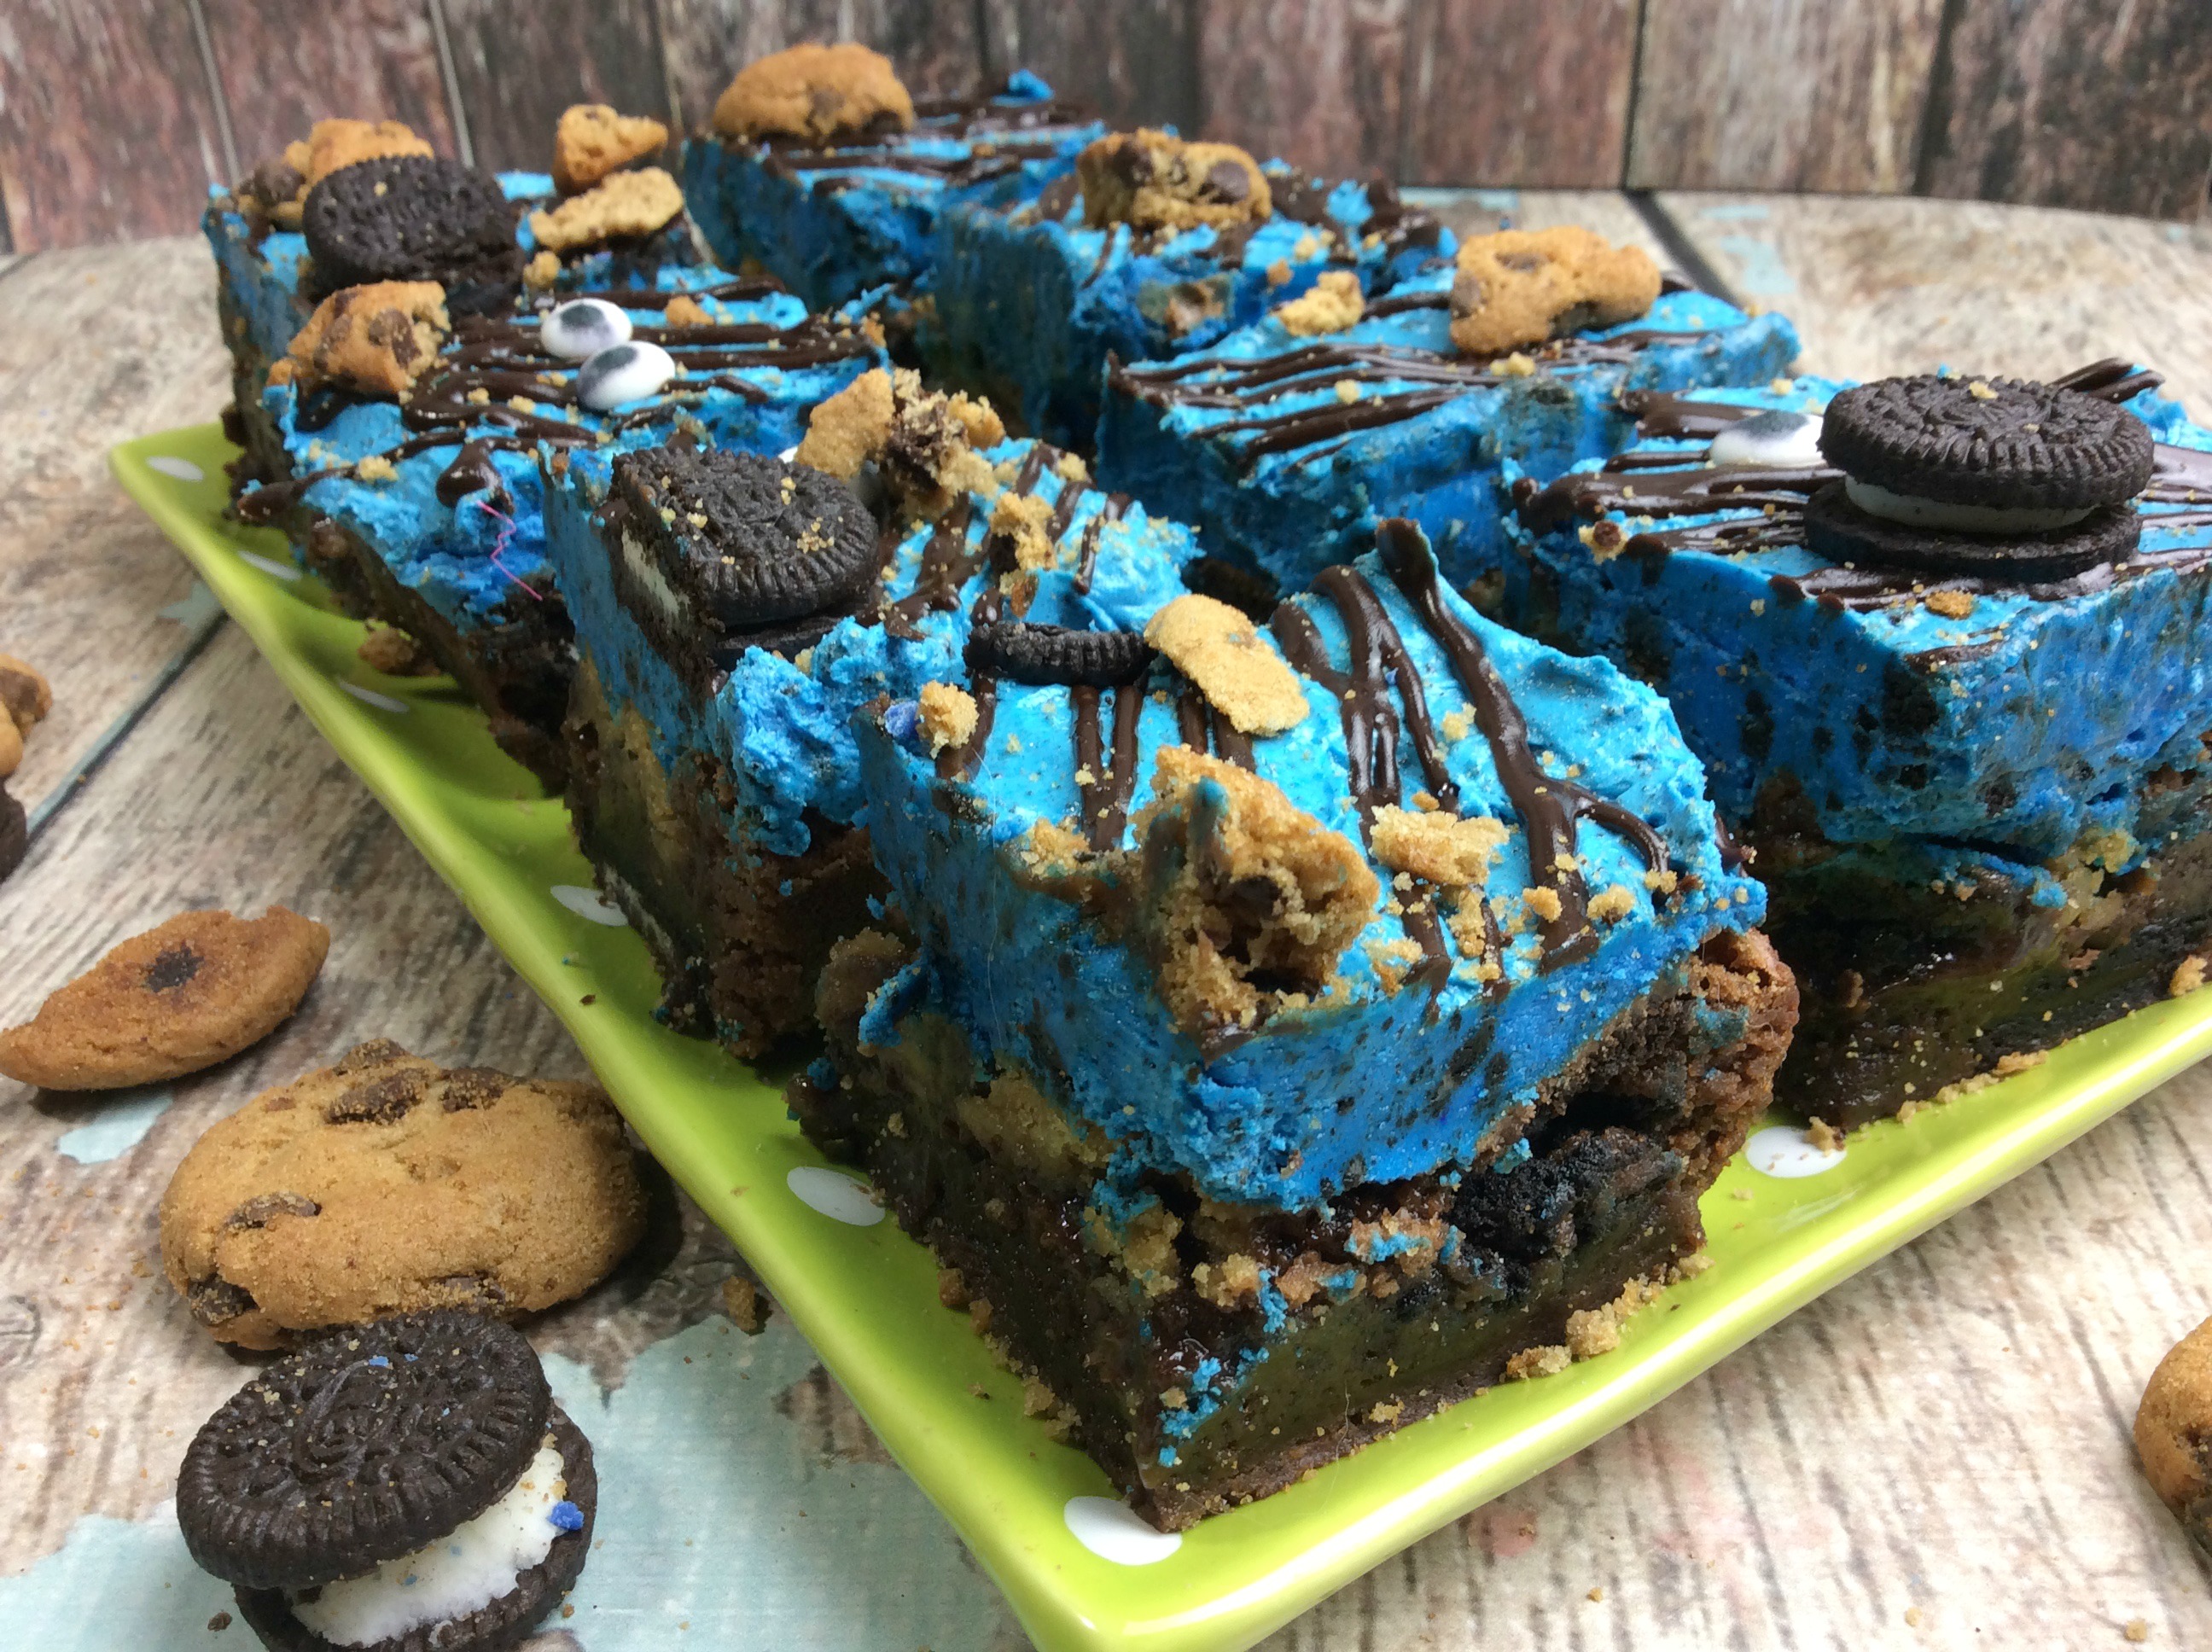 Looking for a fun cookie monster treat? These Cookie Monster Brownies are so tasty and kids will love them. Perfect for your Cookie Monster fan.